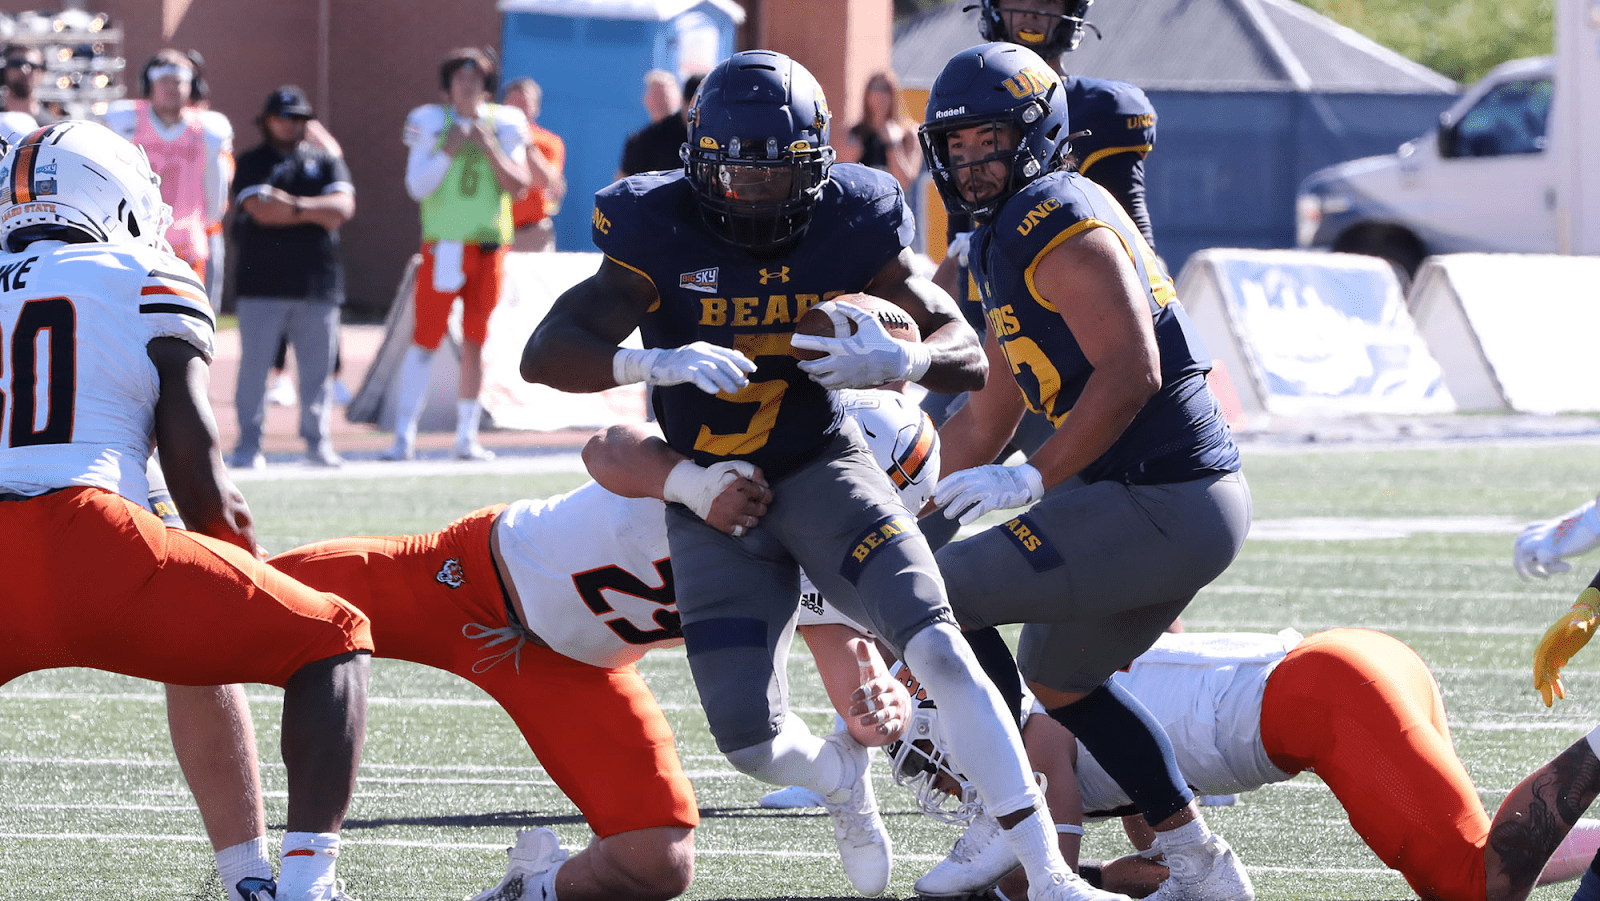 RB Elijah Dotson has been a difference maker for Northern Colorado since transferring from Sacramento State. He brings a great deal of versatility and competitiveness. Hula Bowl scout CJ Marable breaks down Dotson as an NFL Prospect in this article.